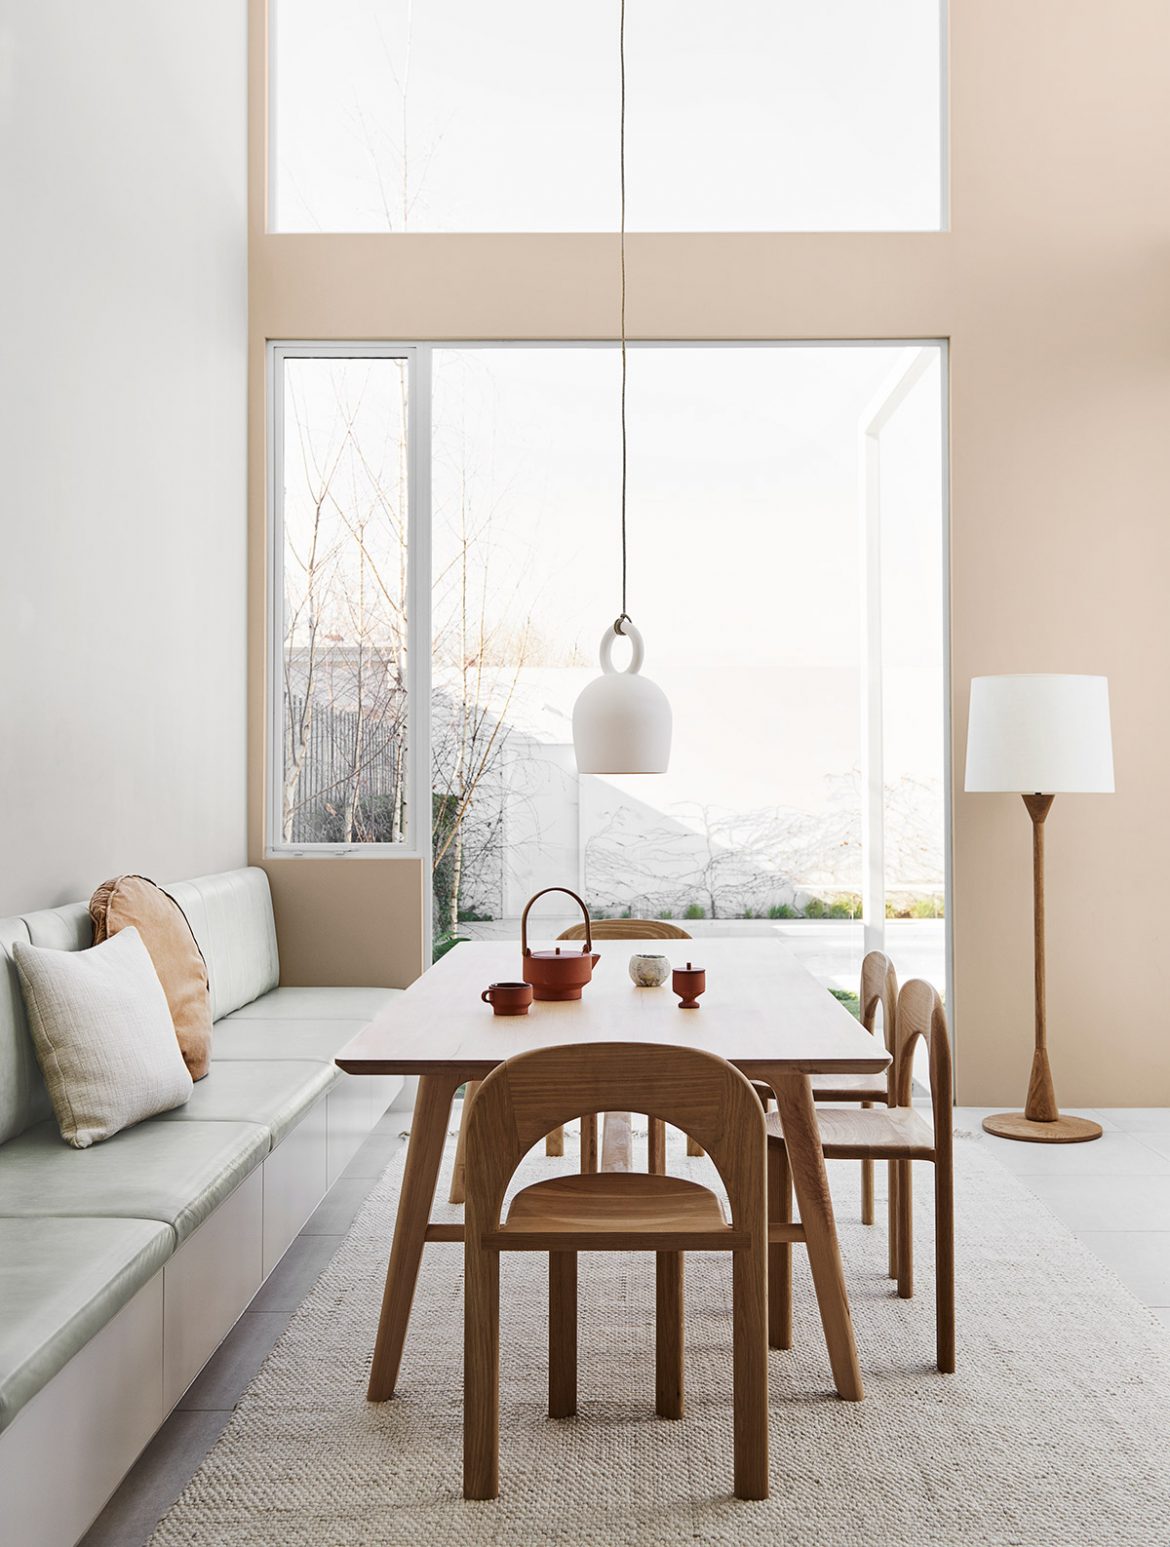 Dulux Colour Forecast 2020. Global colour trends and interiors styles.